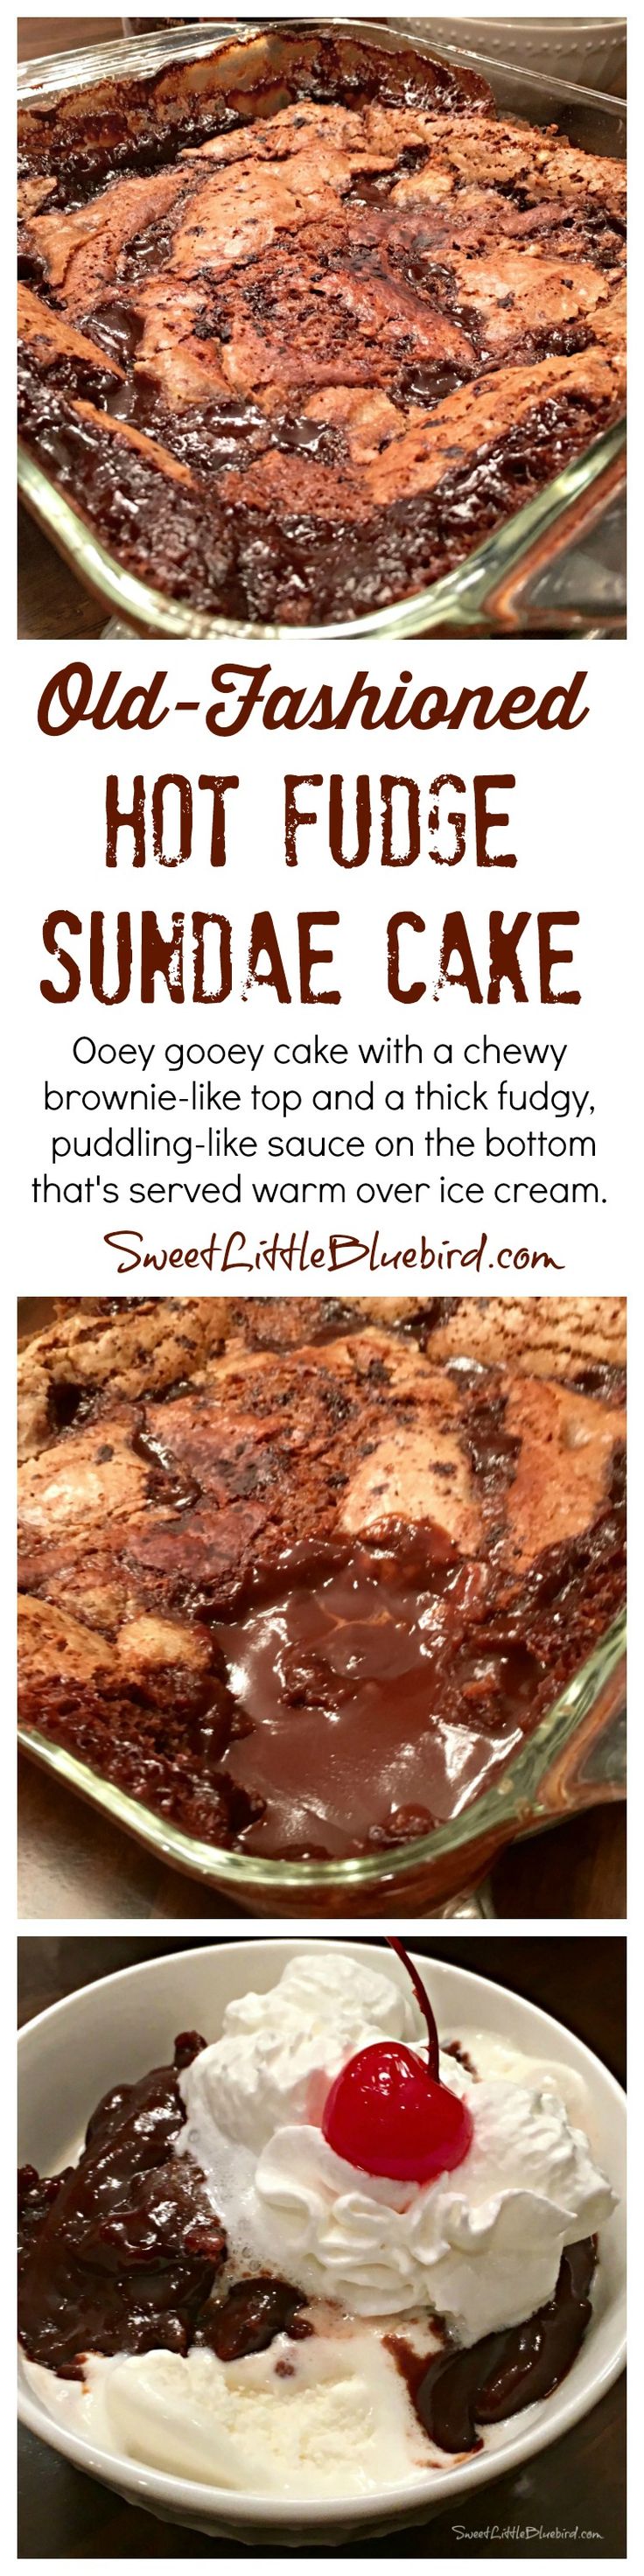 This super easy cake with a chewy brownie-like top and a thick fudgy, puddling-like sauce on the bottom is so delicious and become even more when served warm over ice cream.